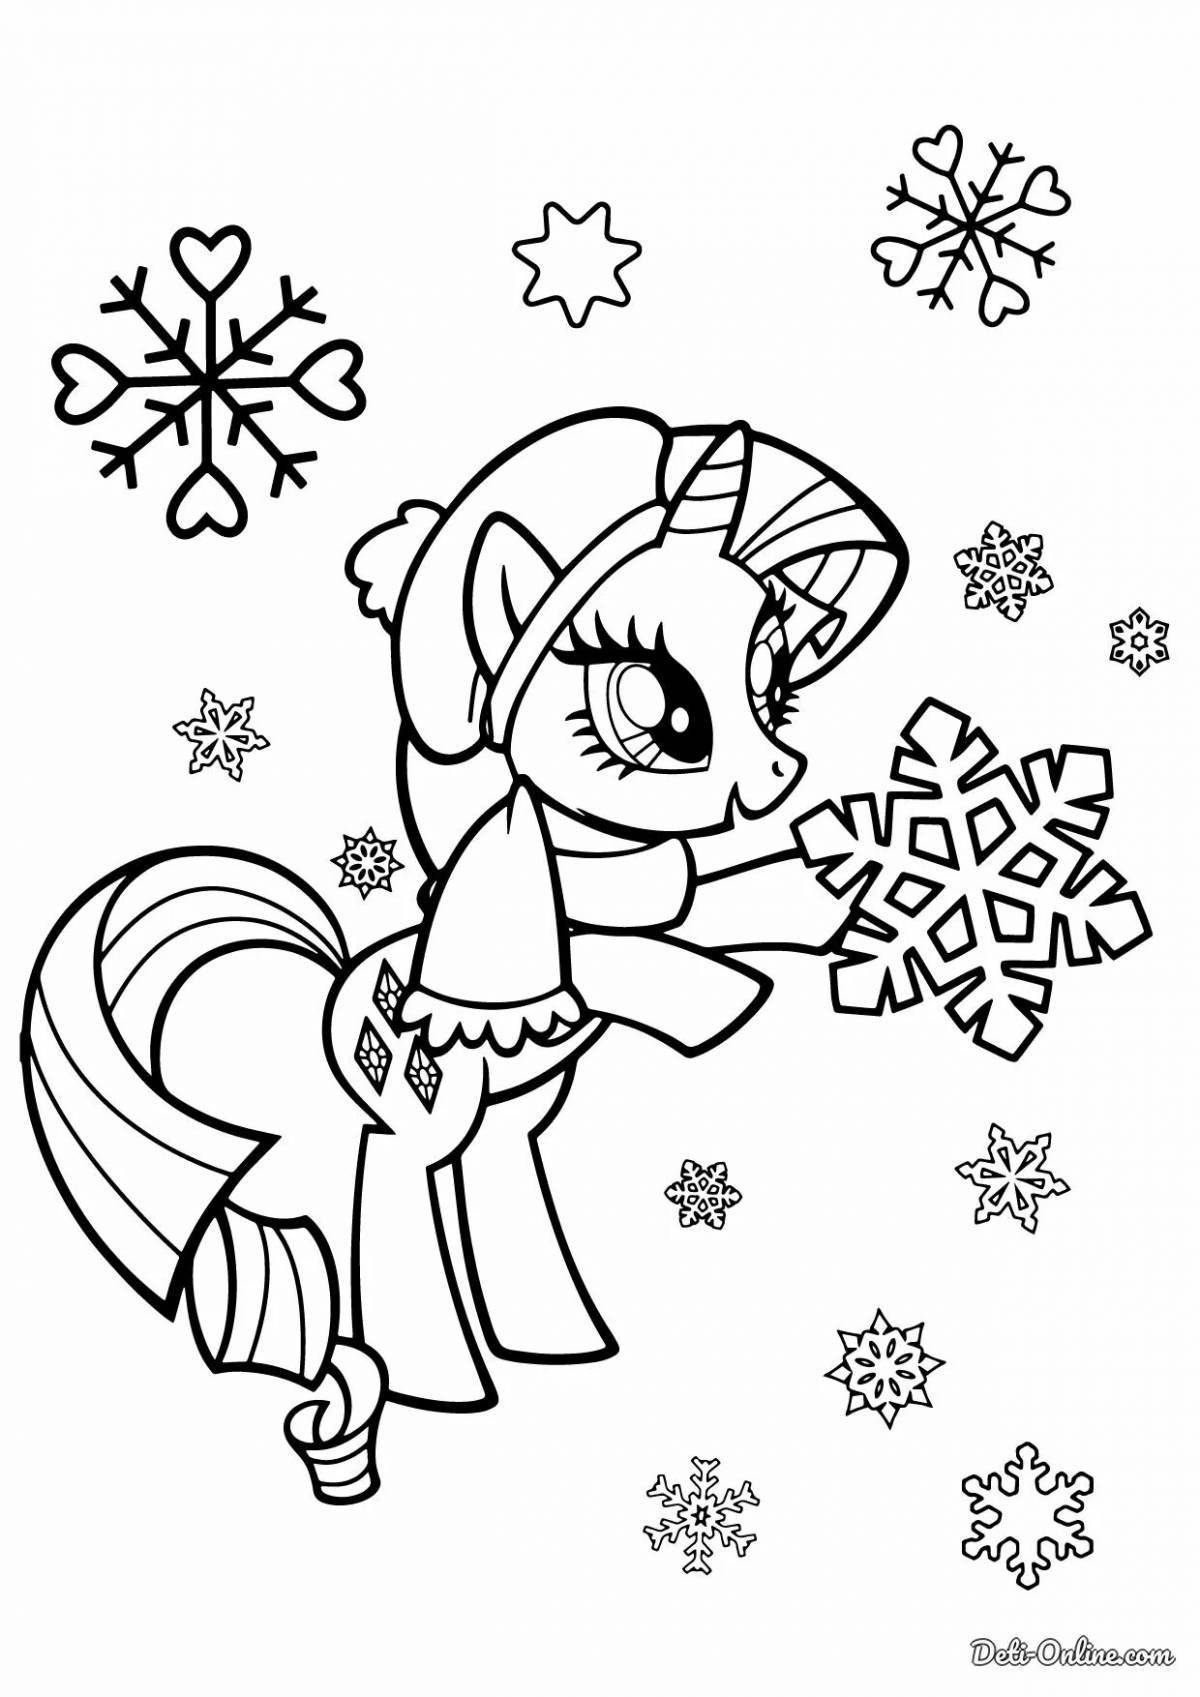 Amazing Christmas coloring pages for girls 8 years old